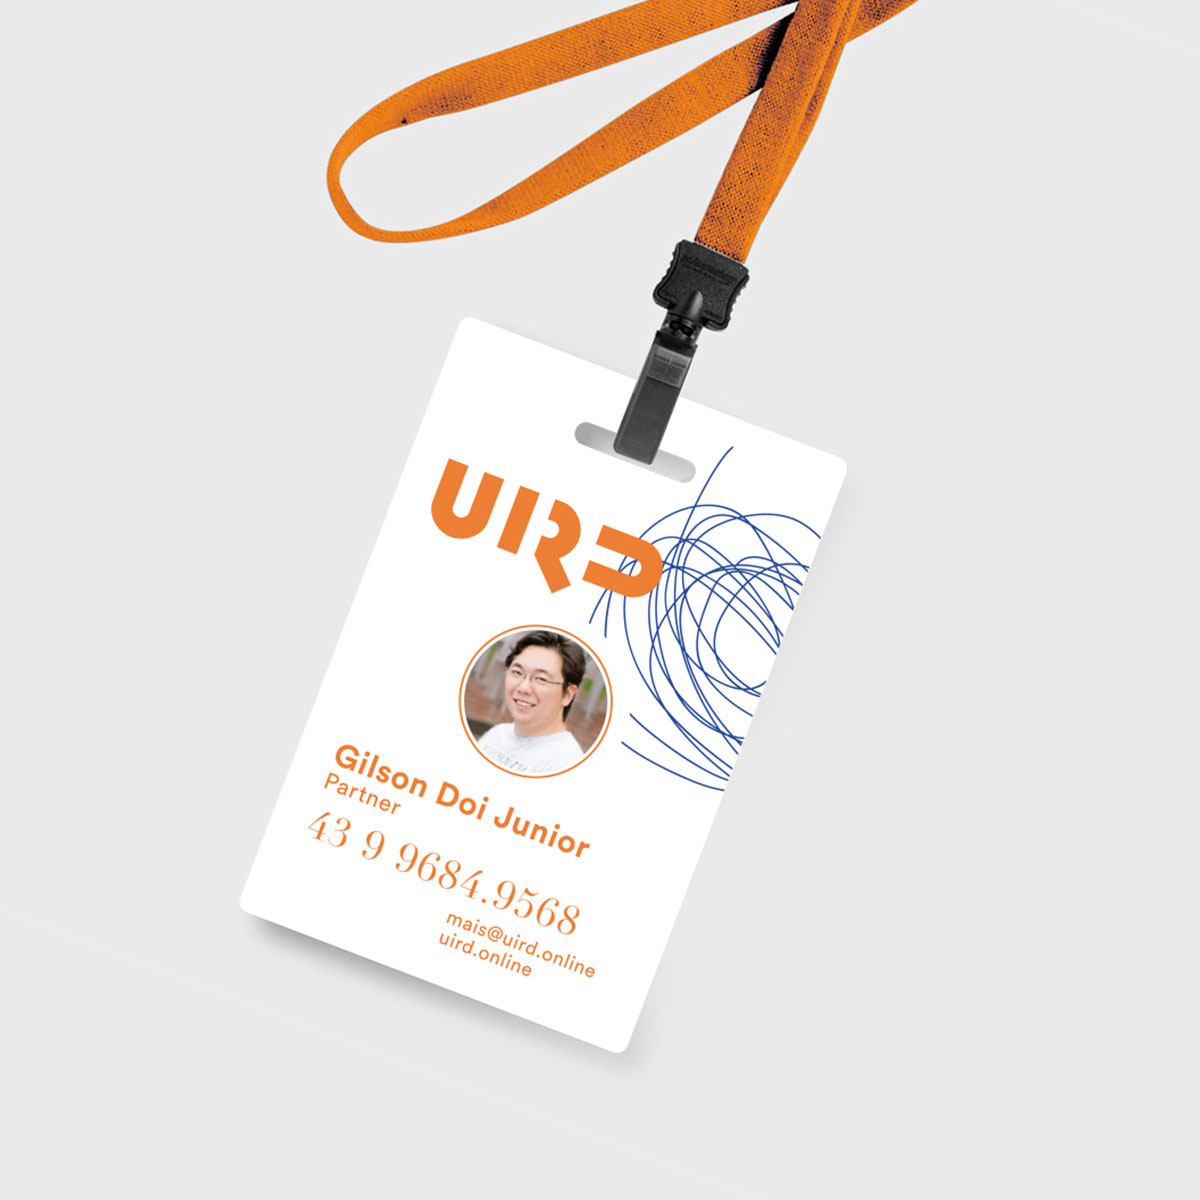 Name tag or badge of UIRD